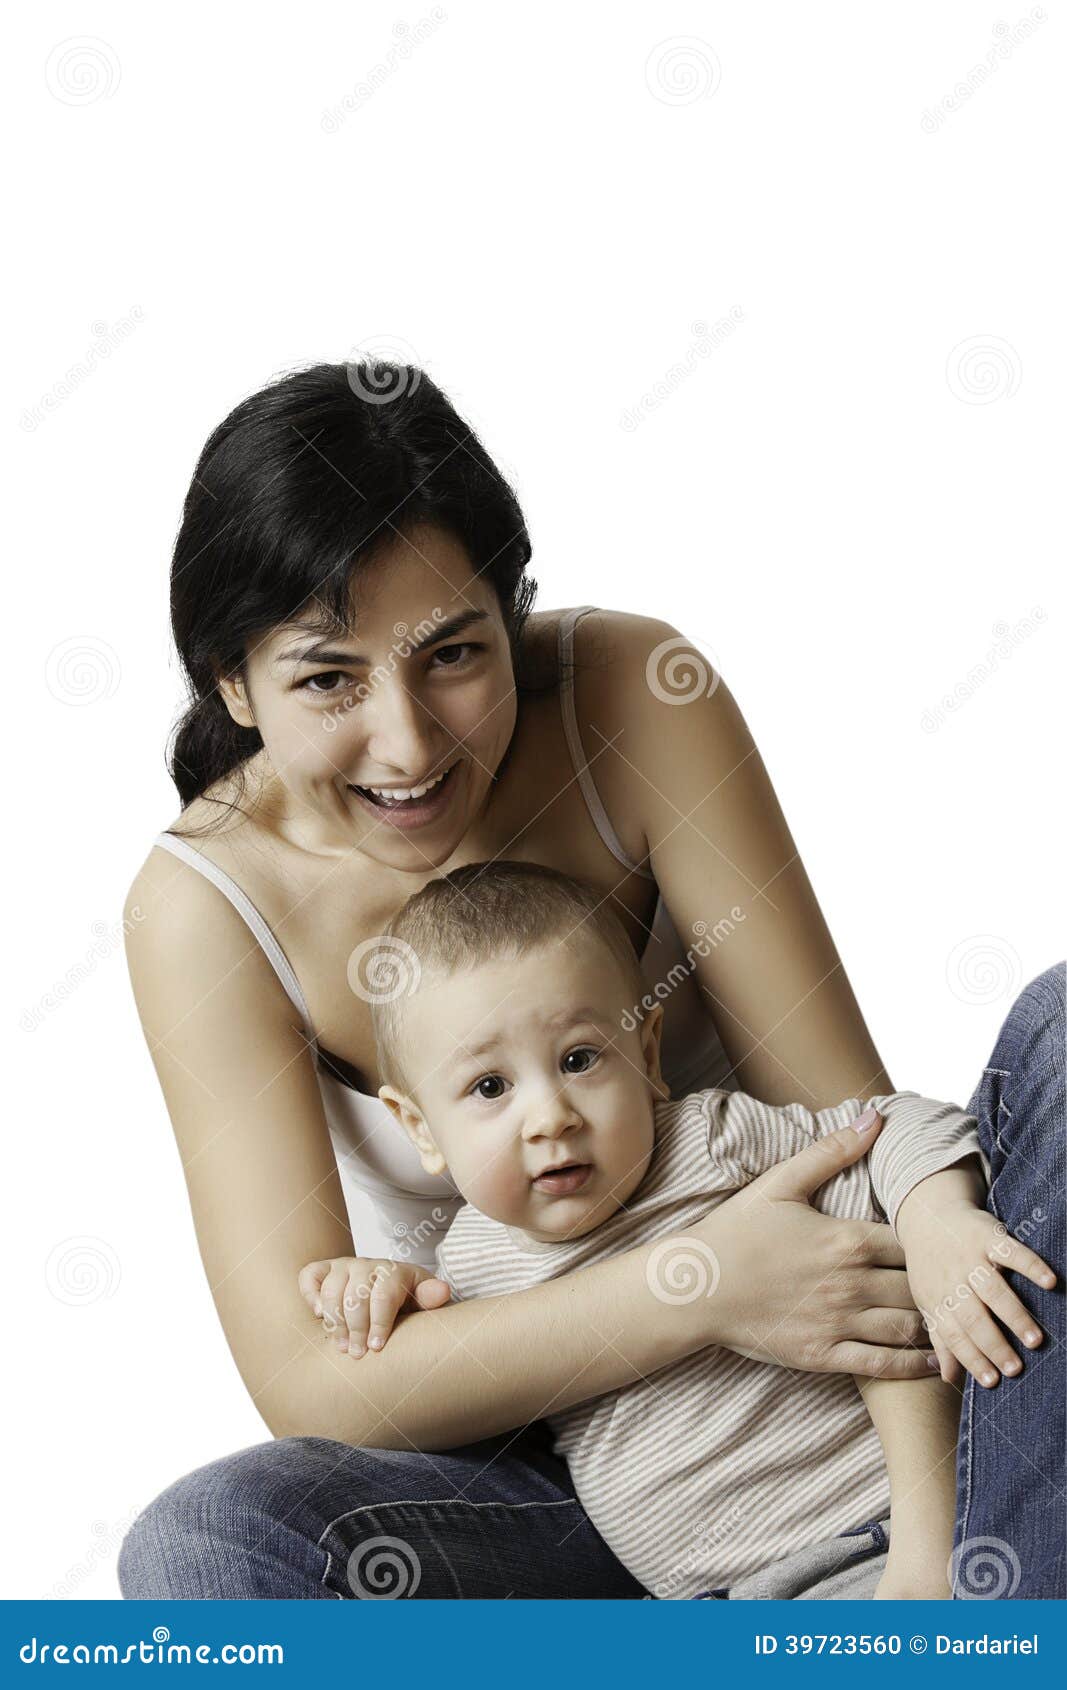 A Young Happy Mother With A Small Child In Her Arms 